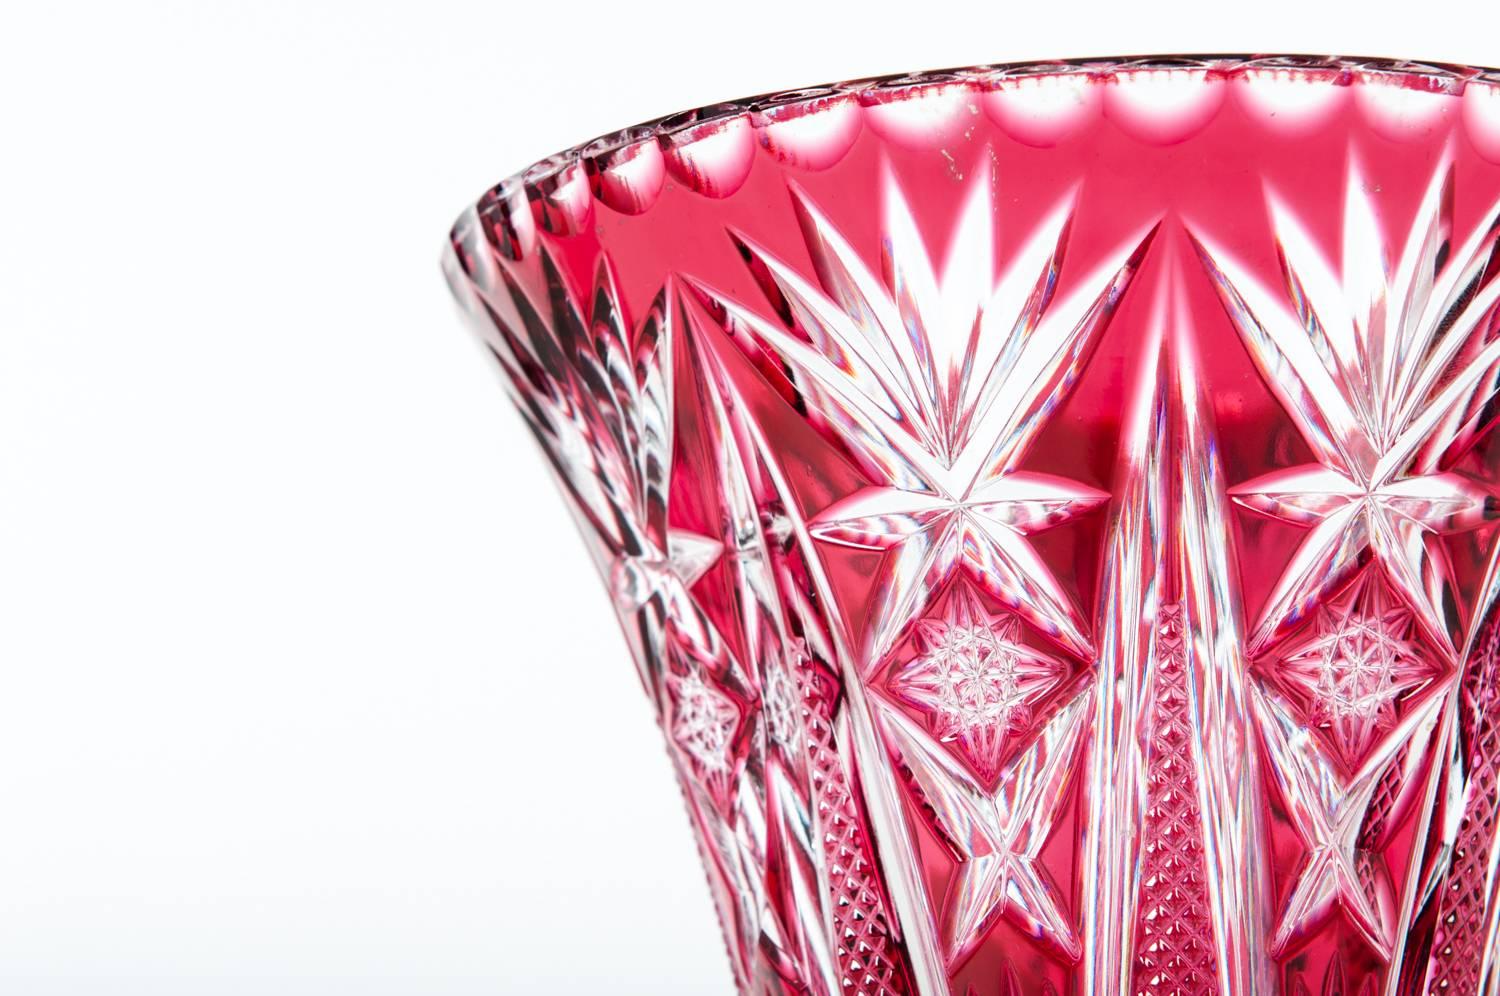 Vintage crystal cut cranberry vase. The vase stand 10 inches high x 6.5 inches top diameter.